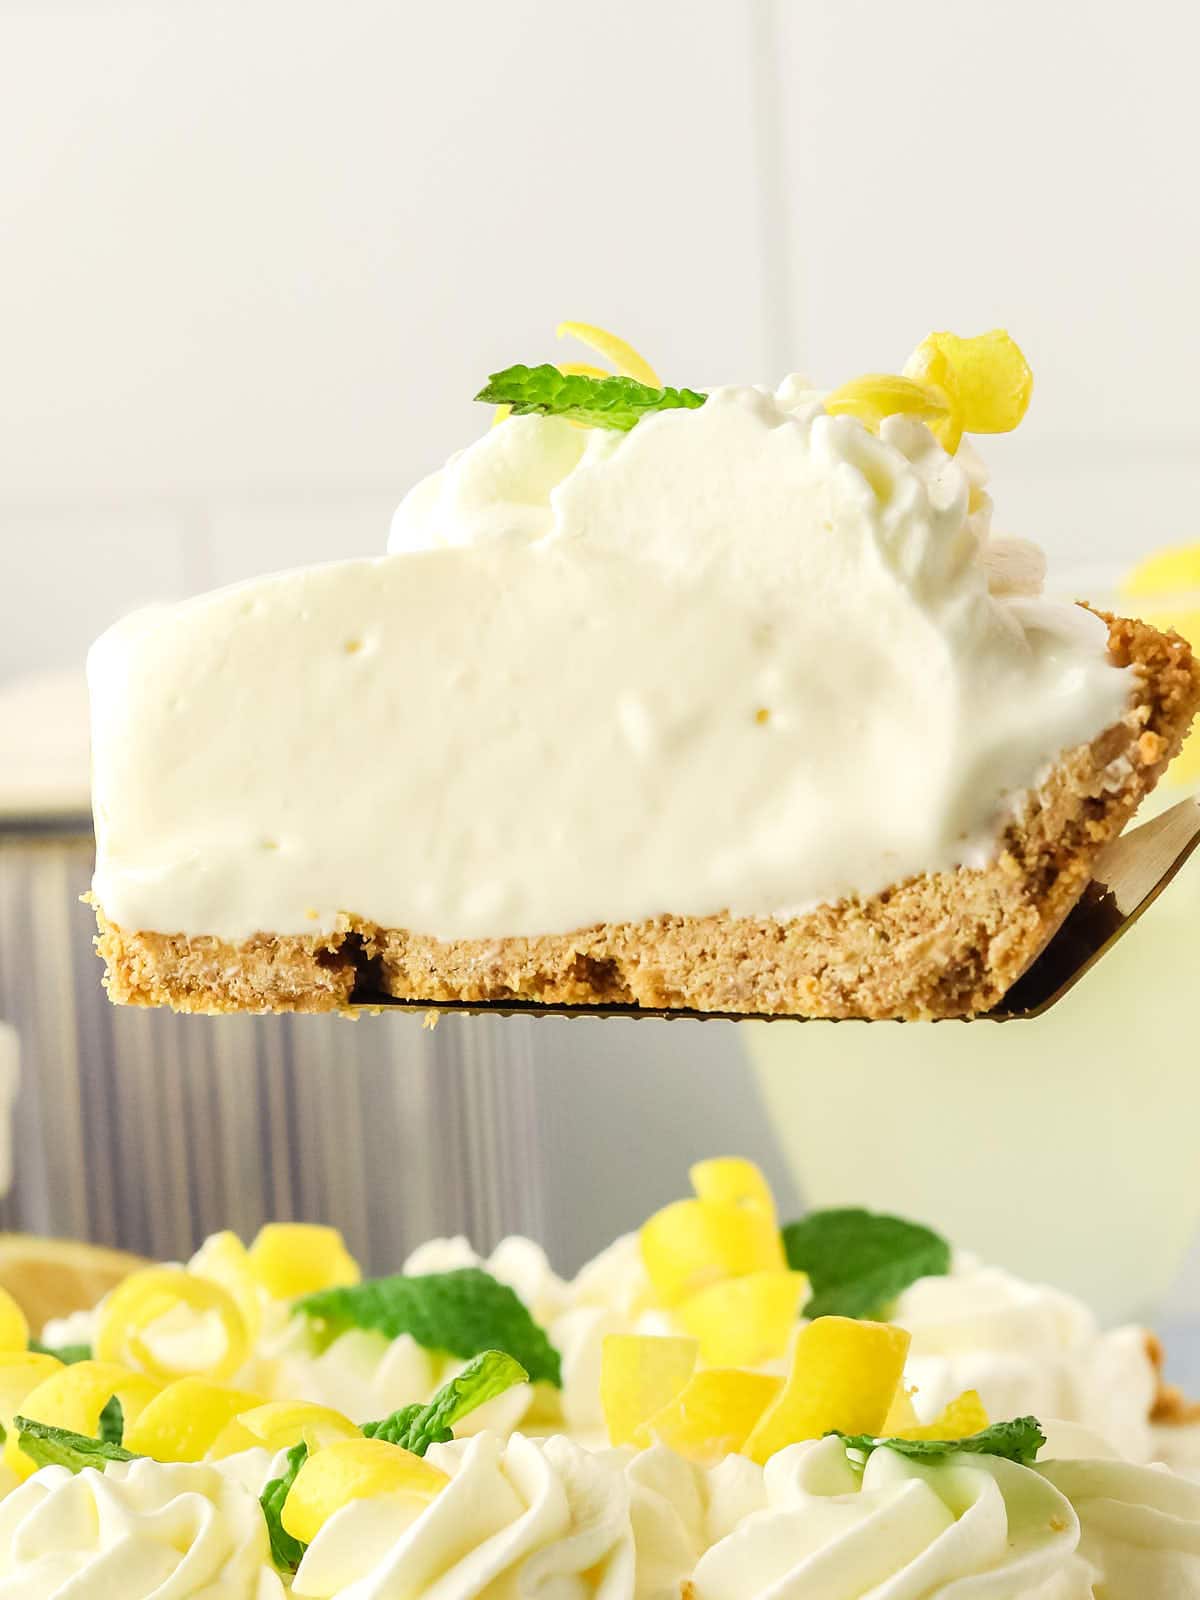 A slice of Lemonade Pie with whipped cream on top.